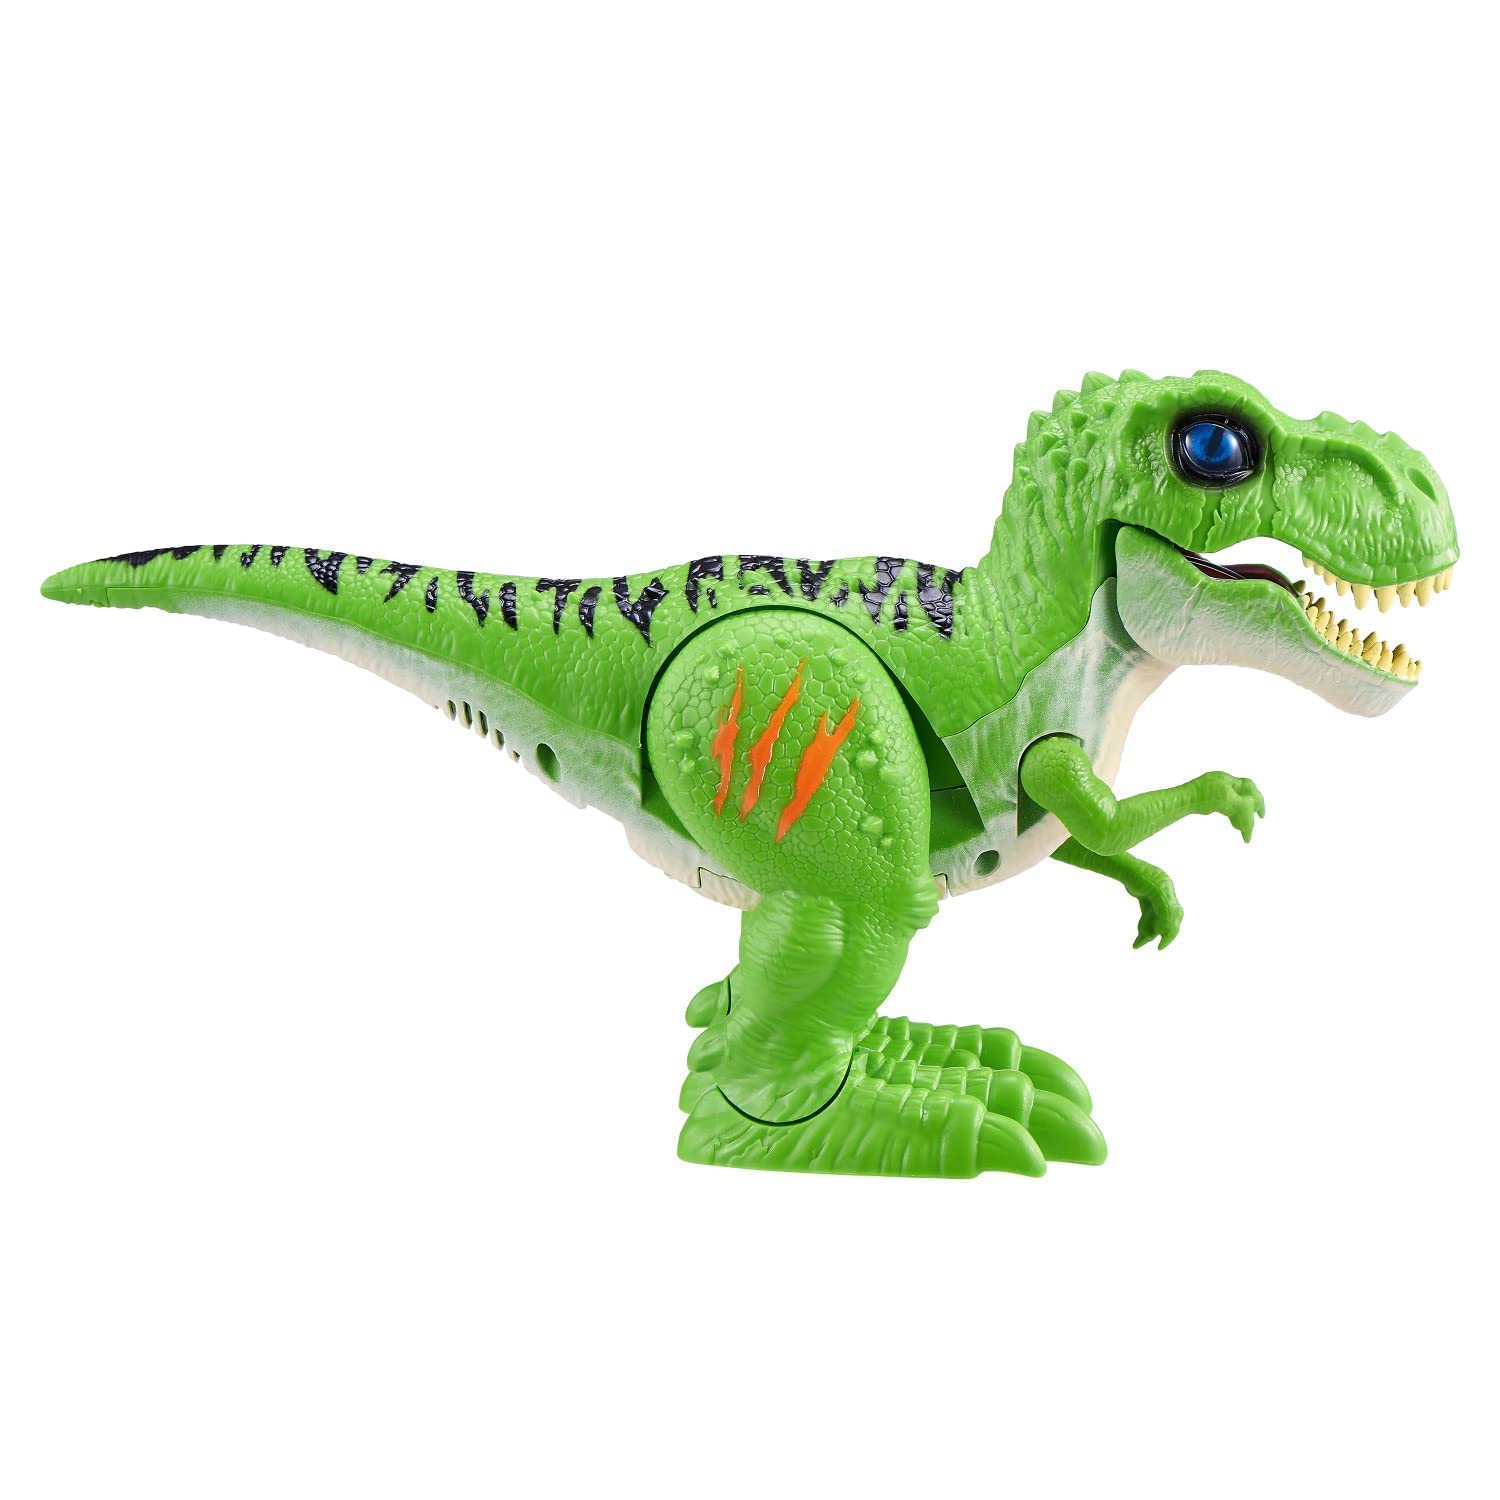 Robo Alive Attacking Green T-Rex Battery-Powered Robotic Toy by Zuru, Dinosaur Toy, Birthday Gift for Boys 3 Years Old and Up